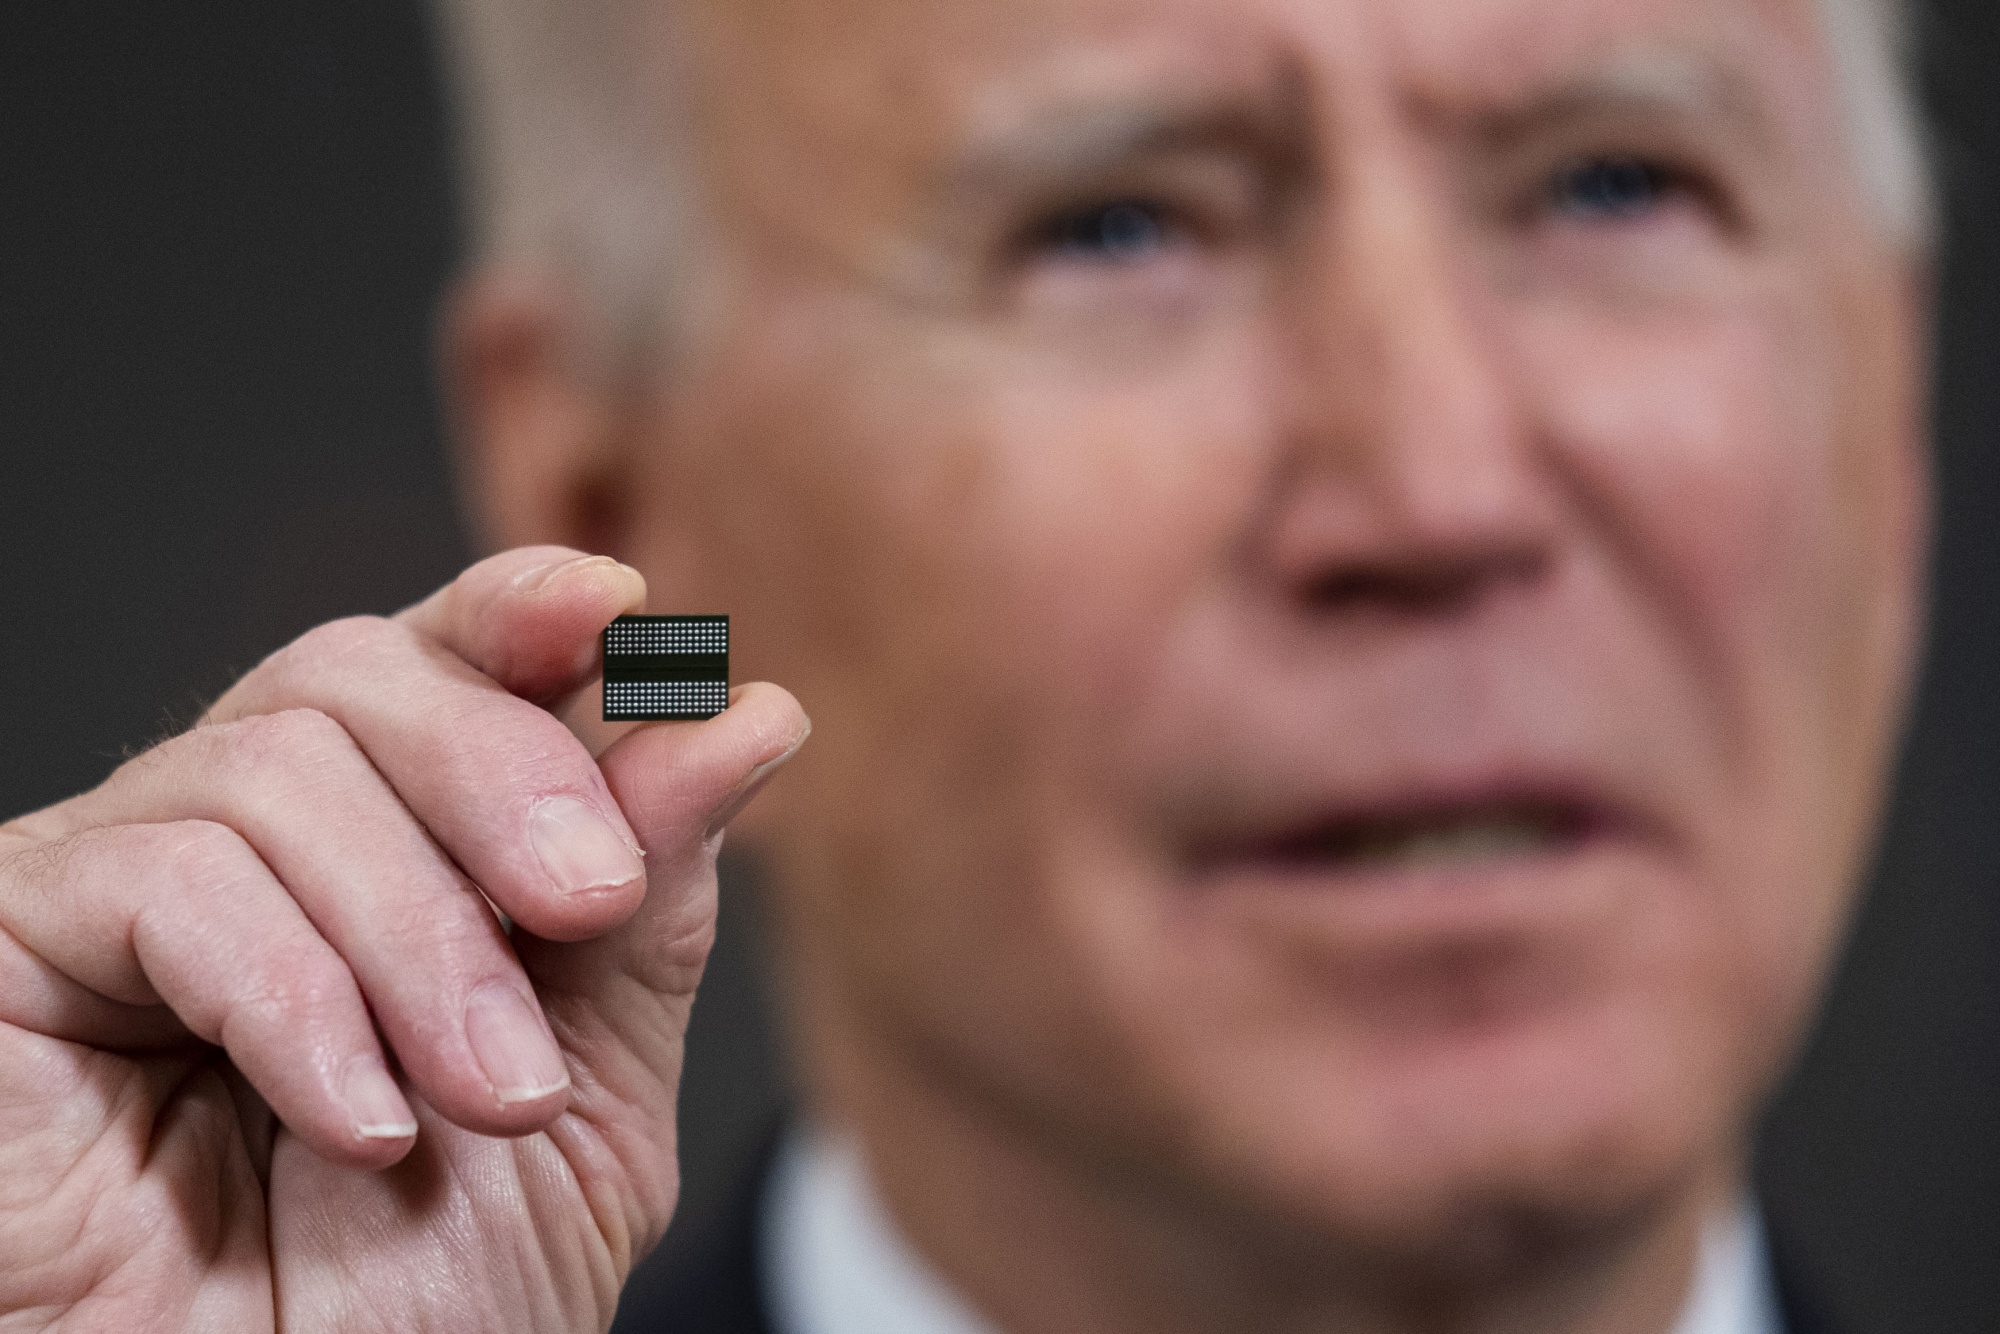 US&nbsp;President Joe Biden holds a semiconductor before signing an executive order at the White House in Washington, on Feb. 24, 2021.